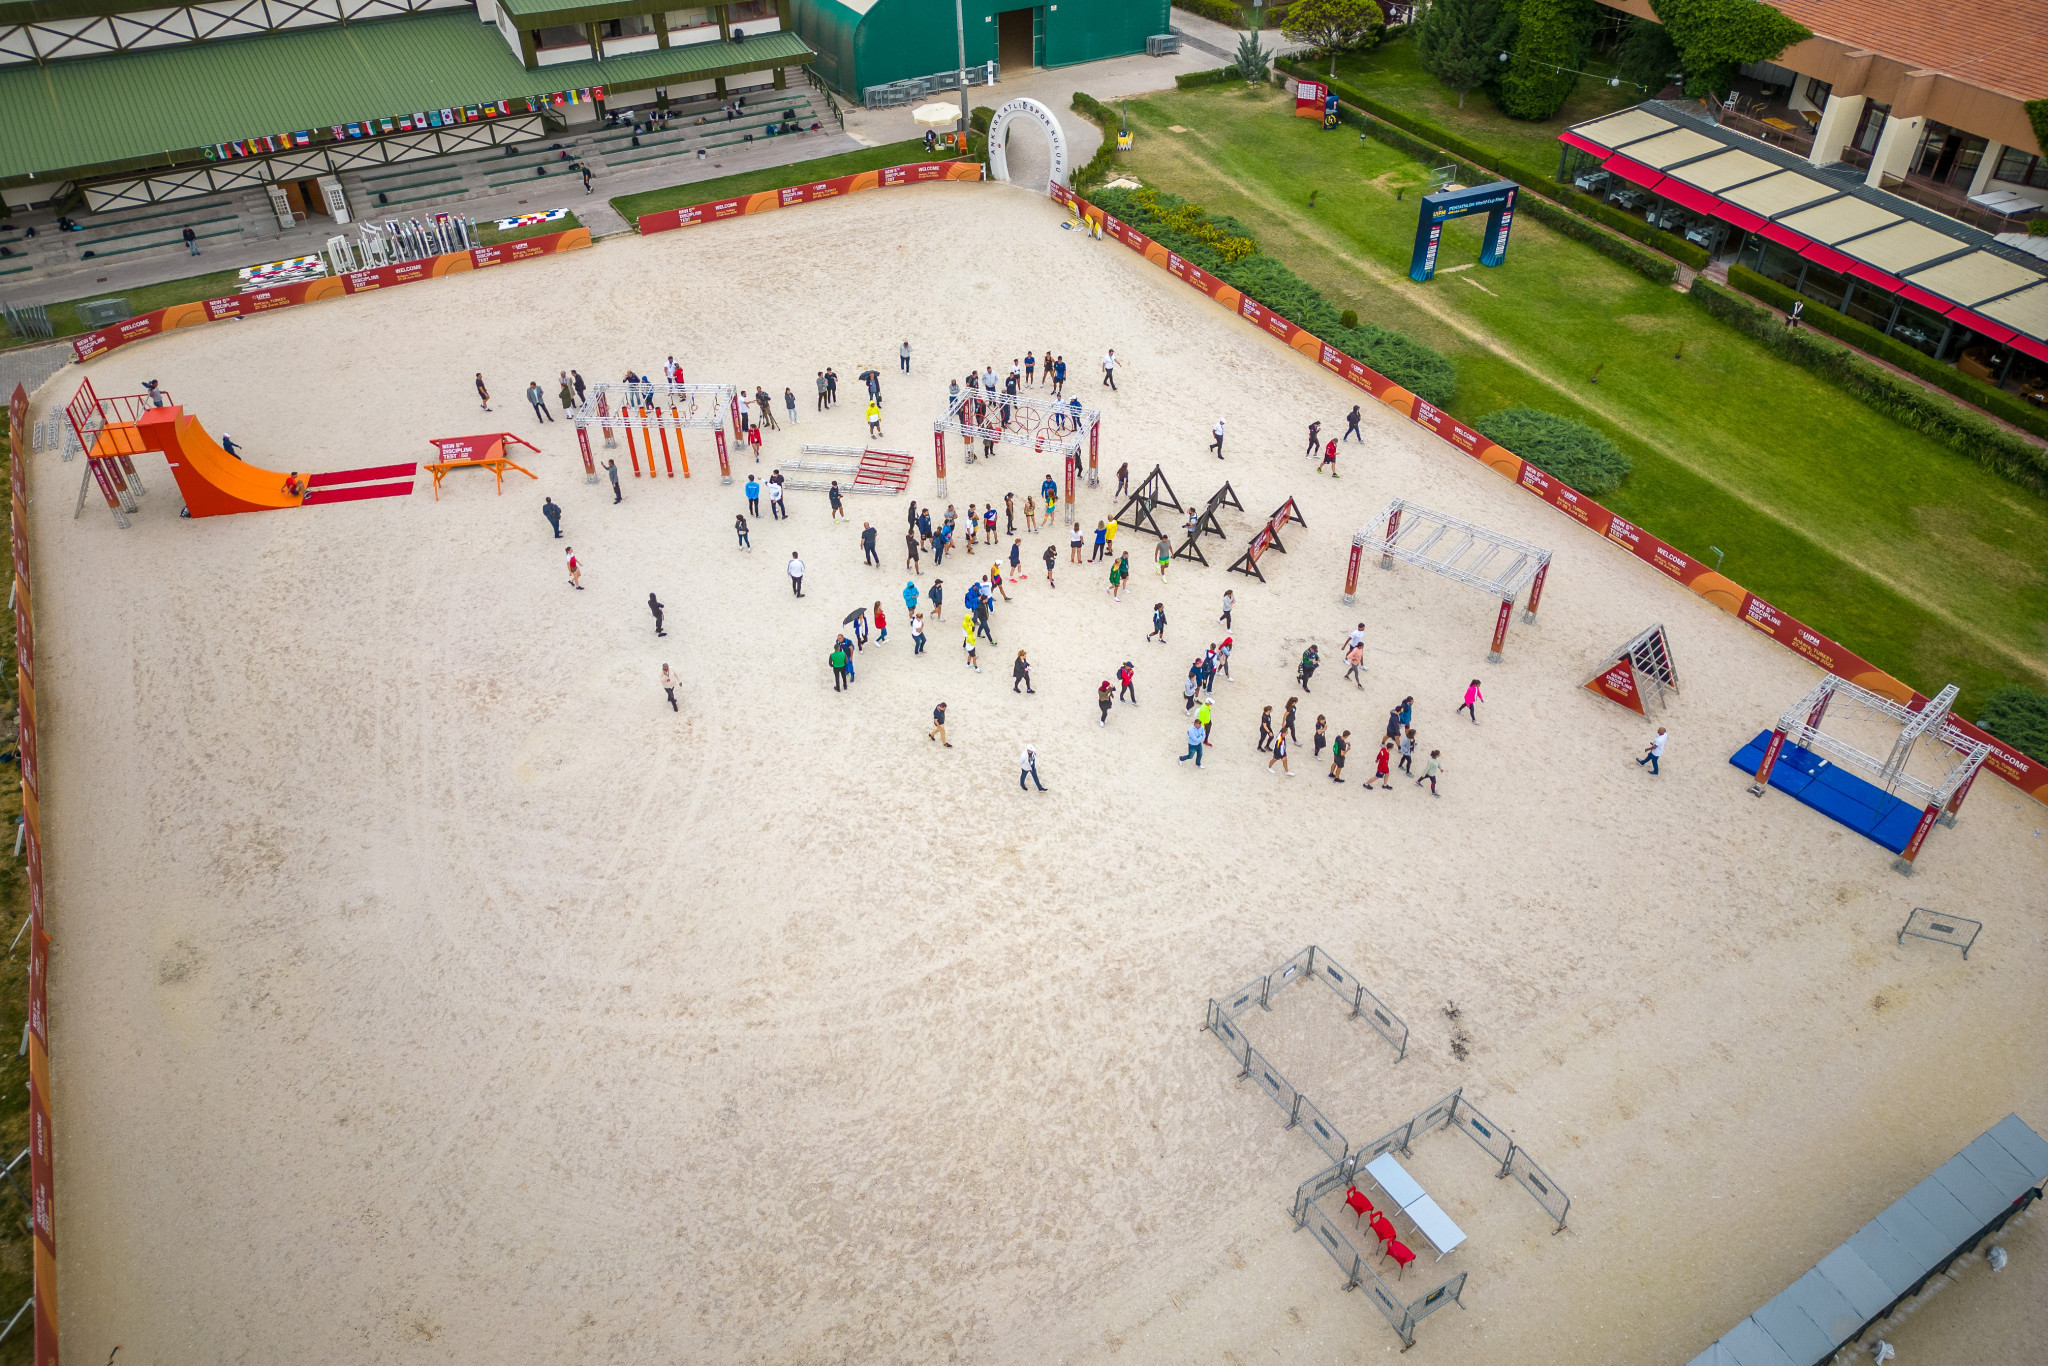 The first obstacle test event for modern pentathlon took place in Ankara ©UIPM/Augustas Didžgalvis